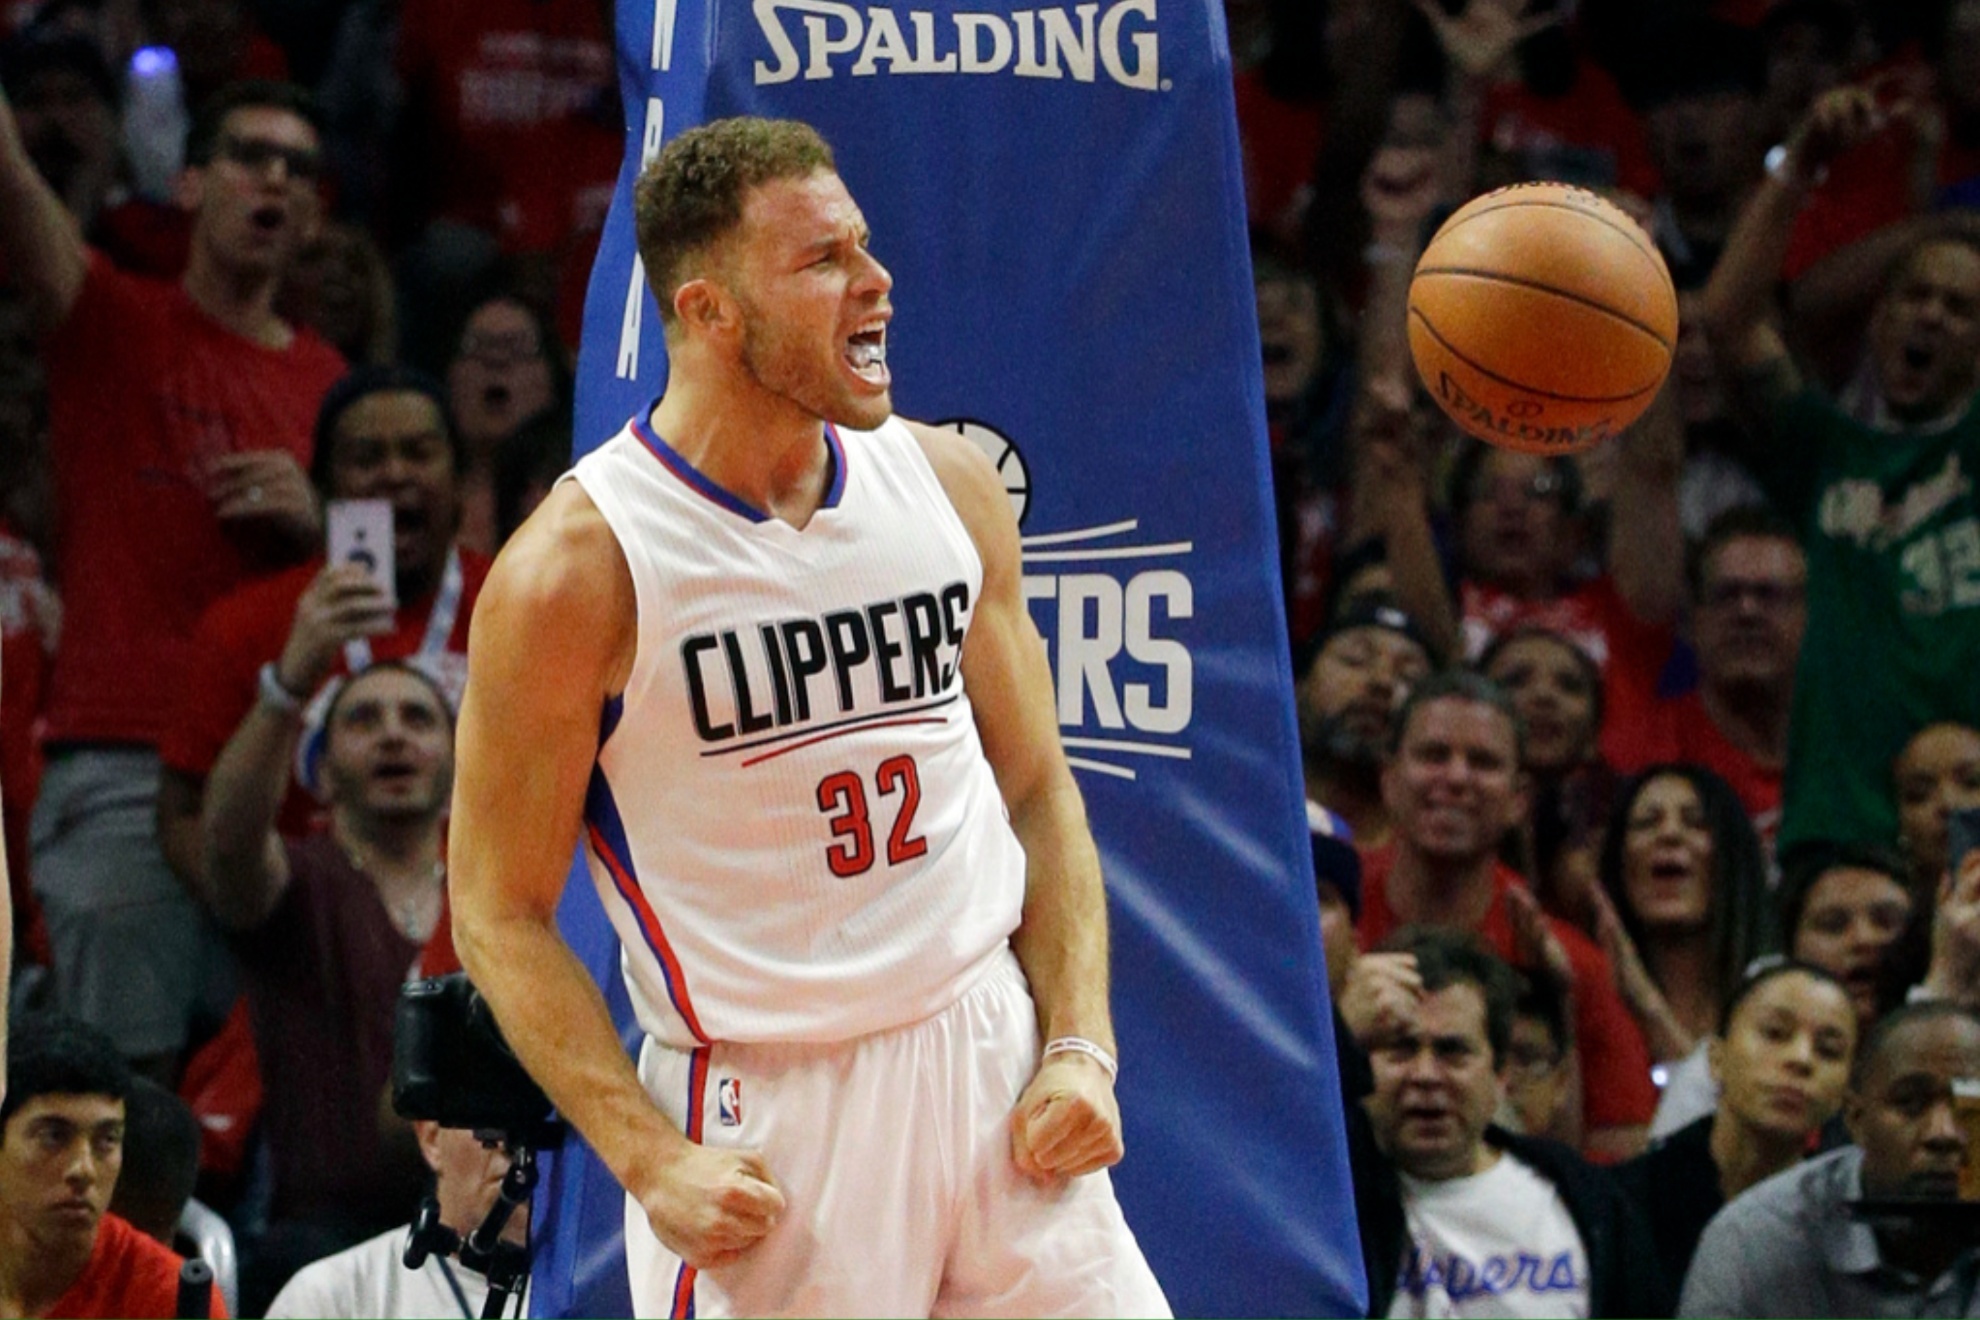 Will Blake Griffin dare to give it a try to his comedy chops?